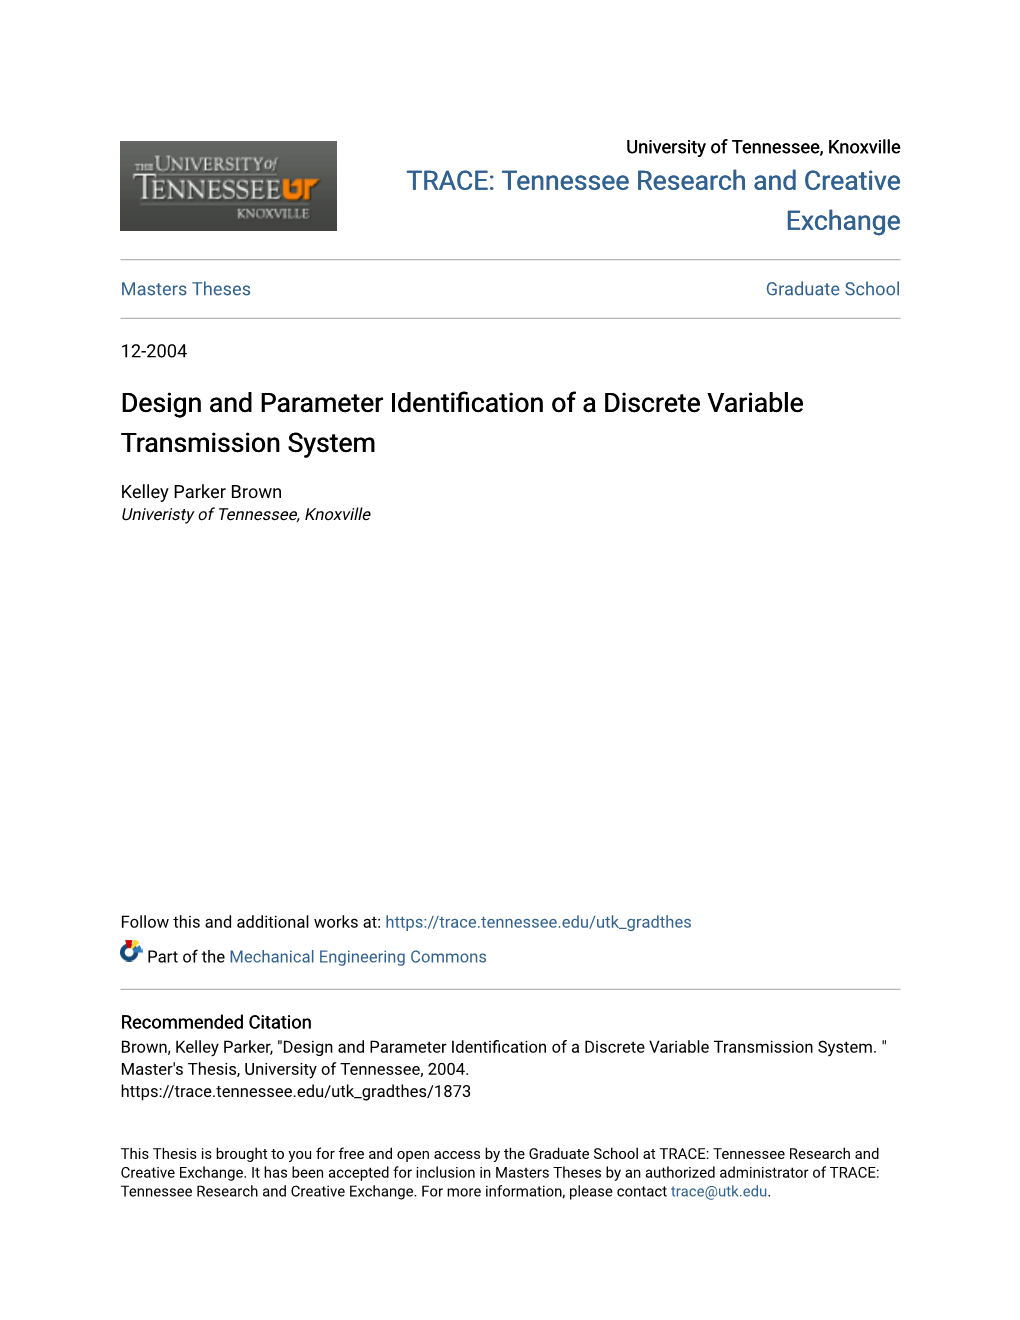 Design and Parameter Identification of a Discrete Variable Transmission System